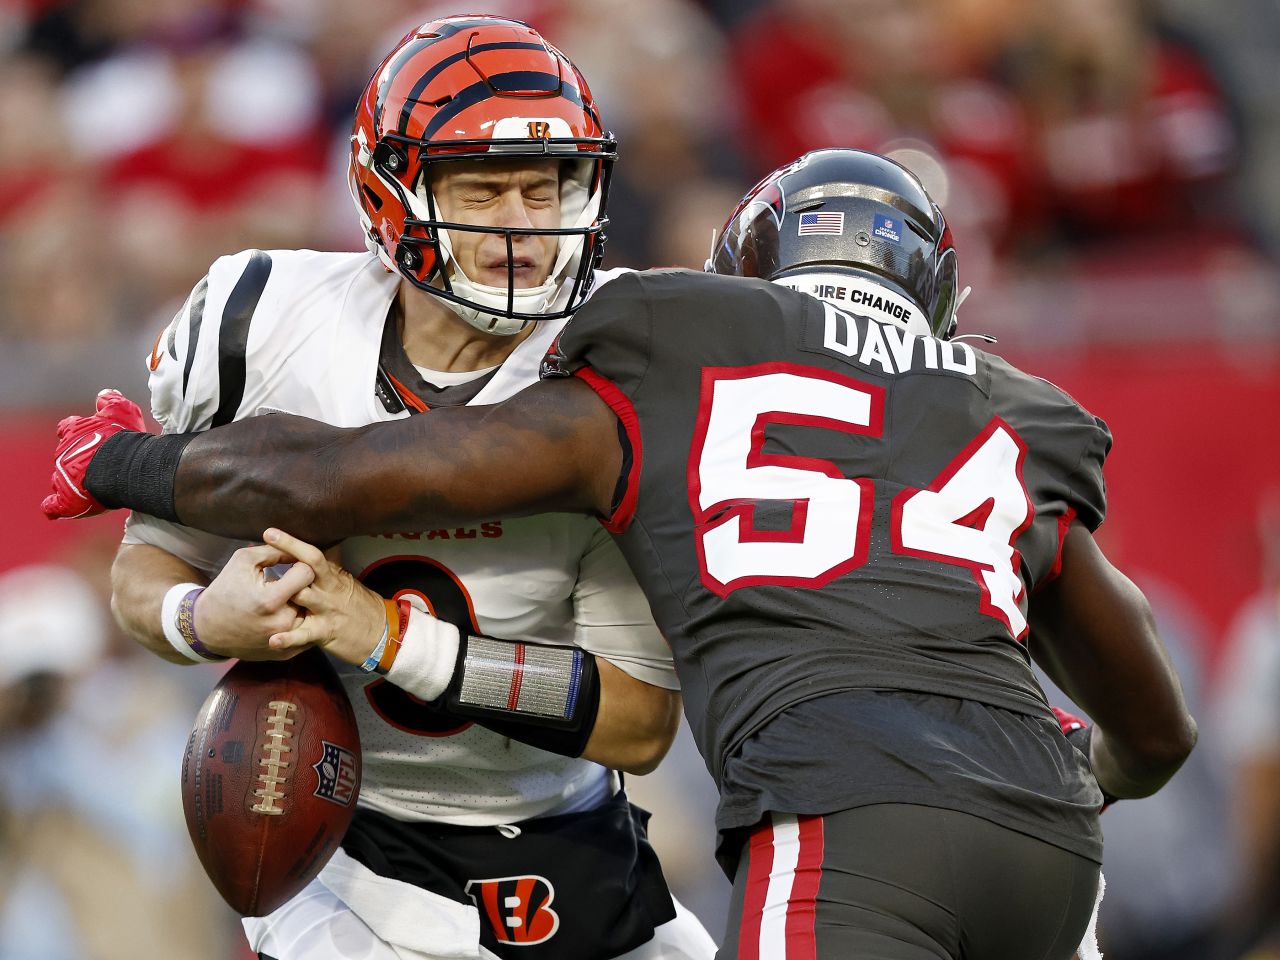 Joe Burrow of the Cincinnati Bengals is sacked by Lavonte David of the Tampa Bay Buccaneers at Raymond James Stadium in Tampa Bay, Florida, on Sunday, December 18.